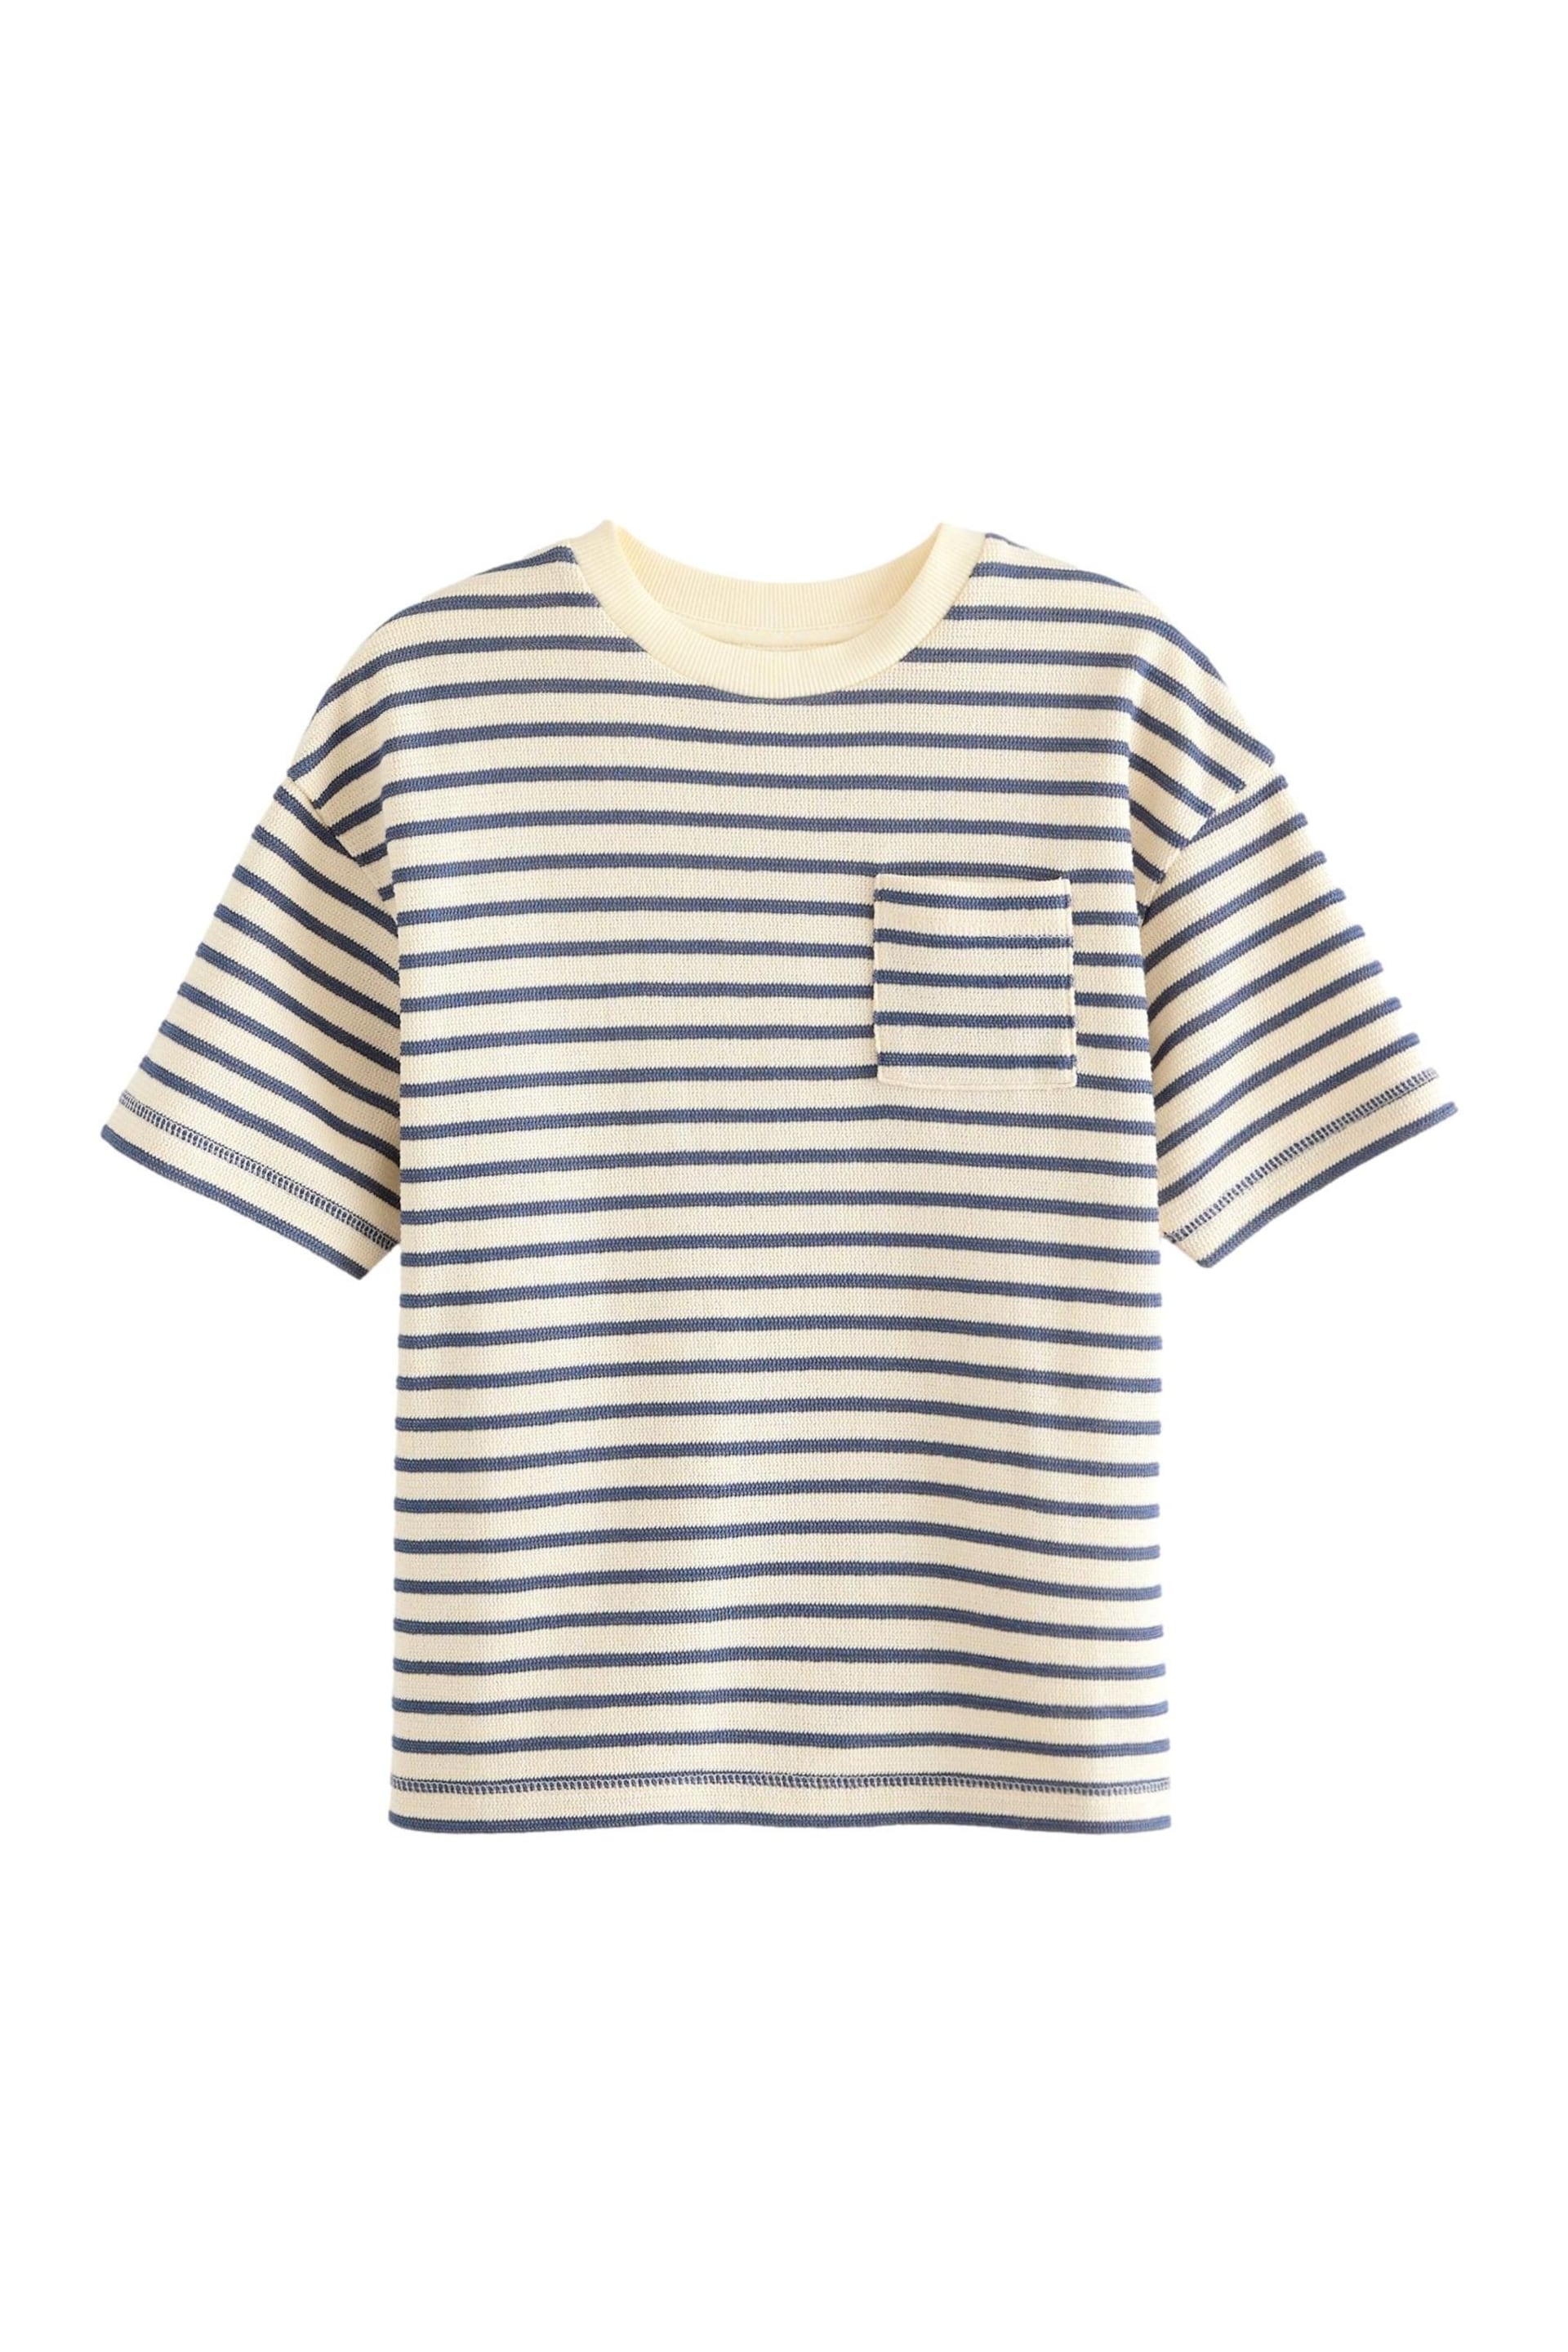 Ecru/Navy Stripe Relax Fit Textured T-Shirt (3-16yrs) - Image 1 of 4